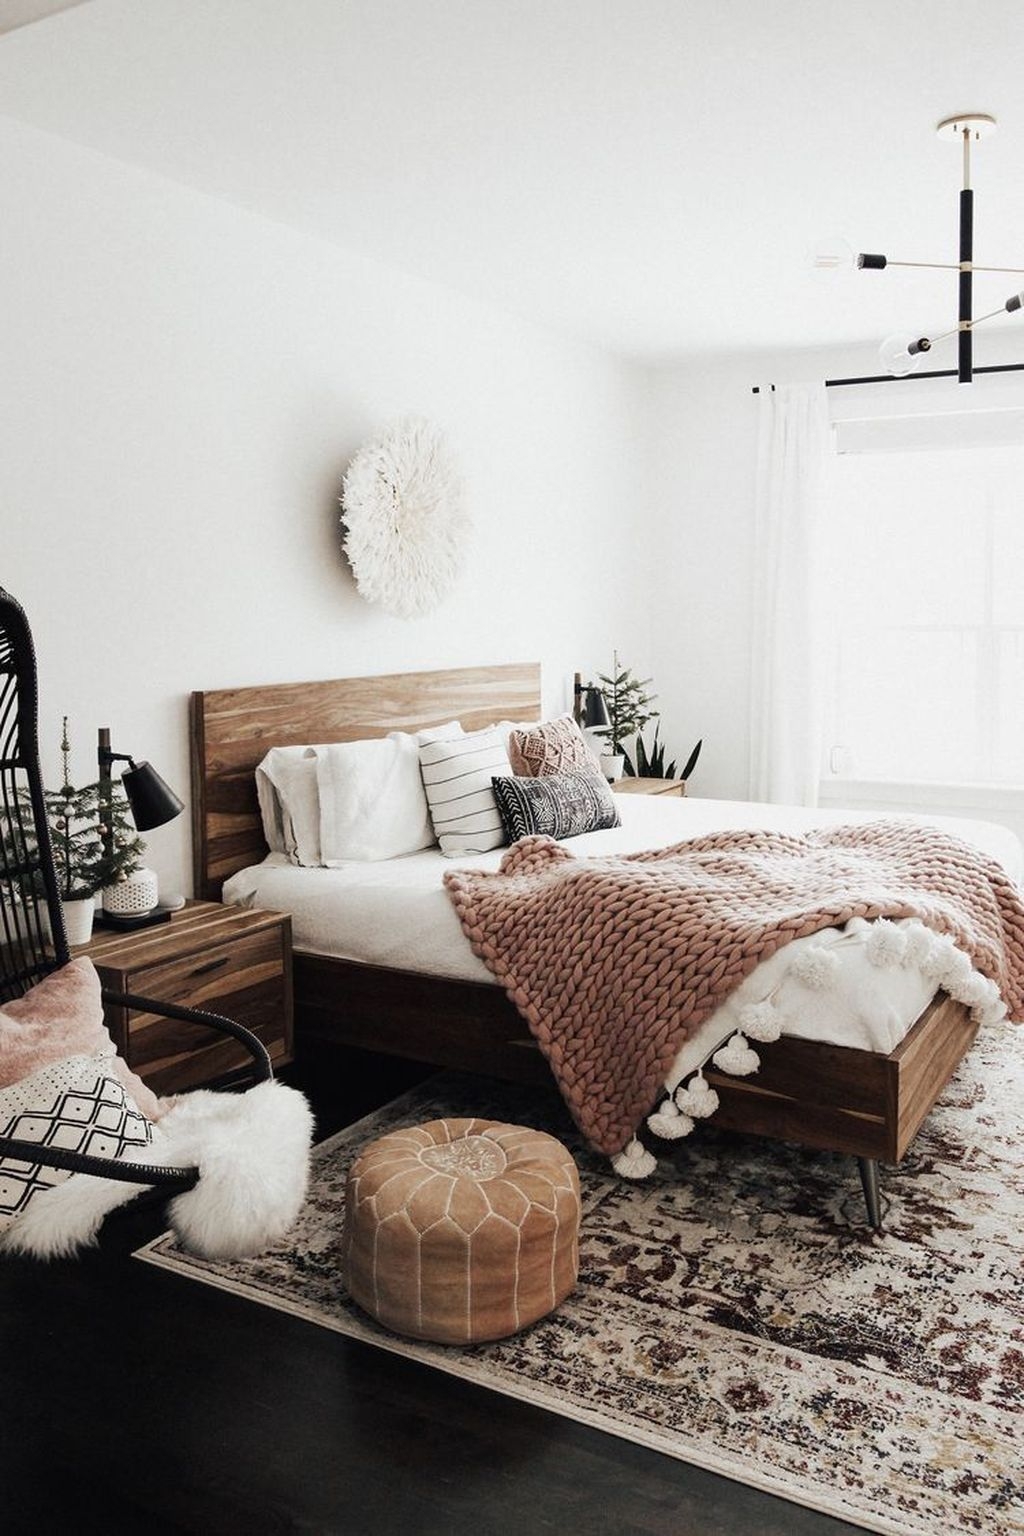 Affordable Rug Bedroom Decor Ideas To Try Right Now 33